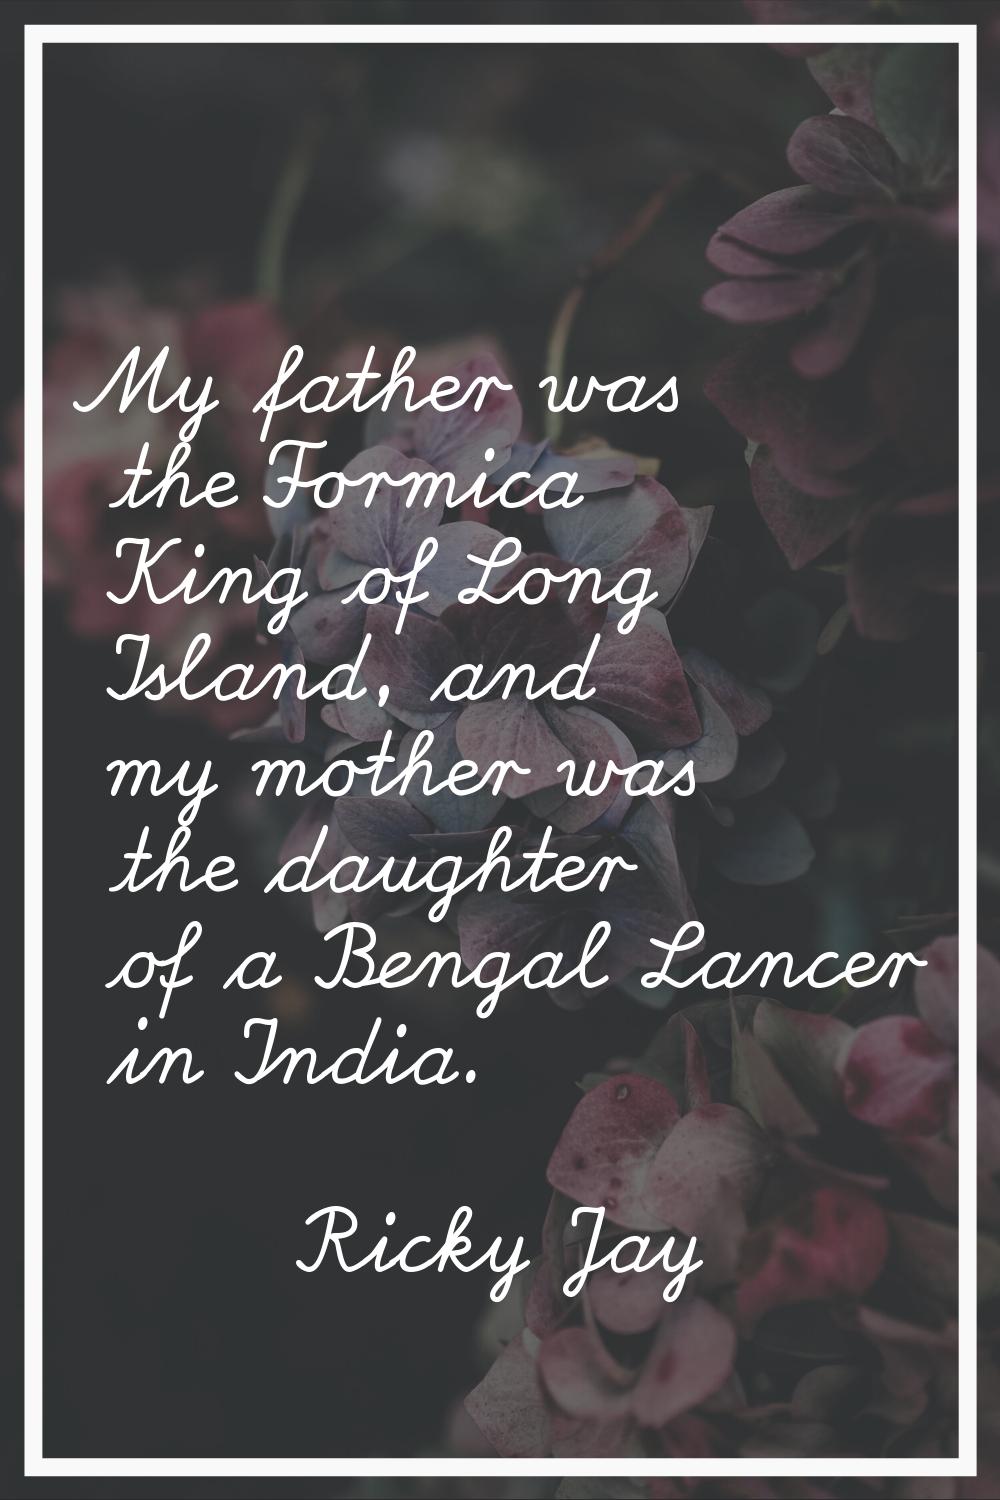 My father was the Formica King of Long Island, and my mother was the daughter of a Bengal Lancer in